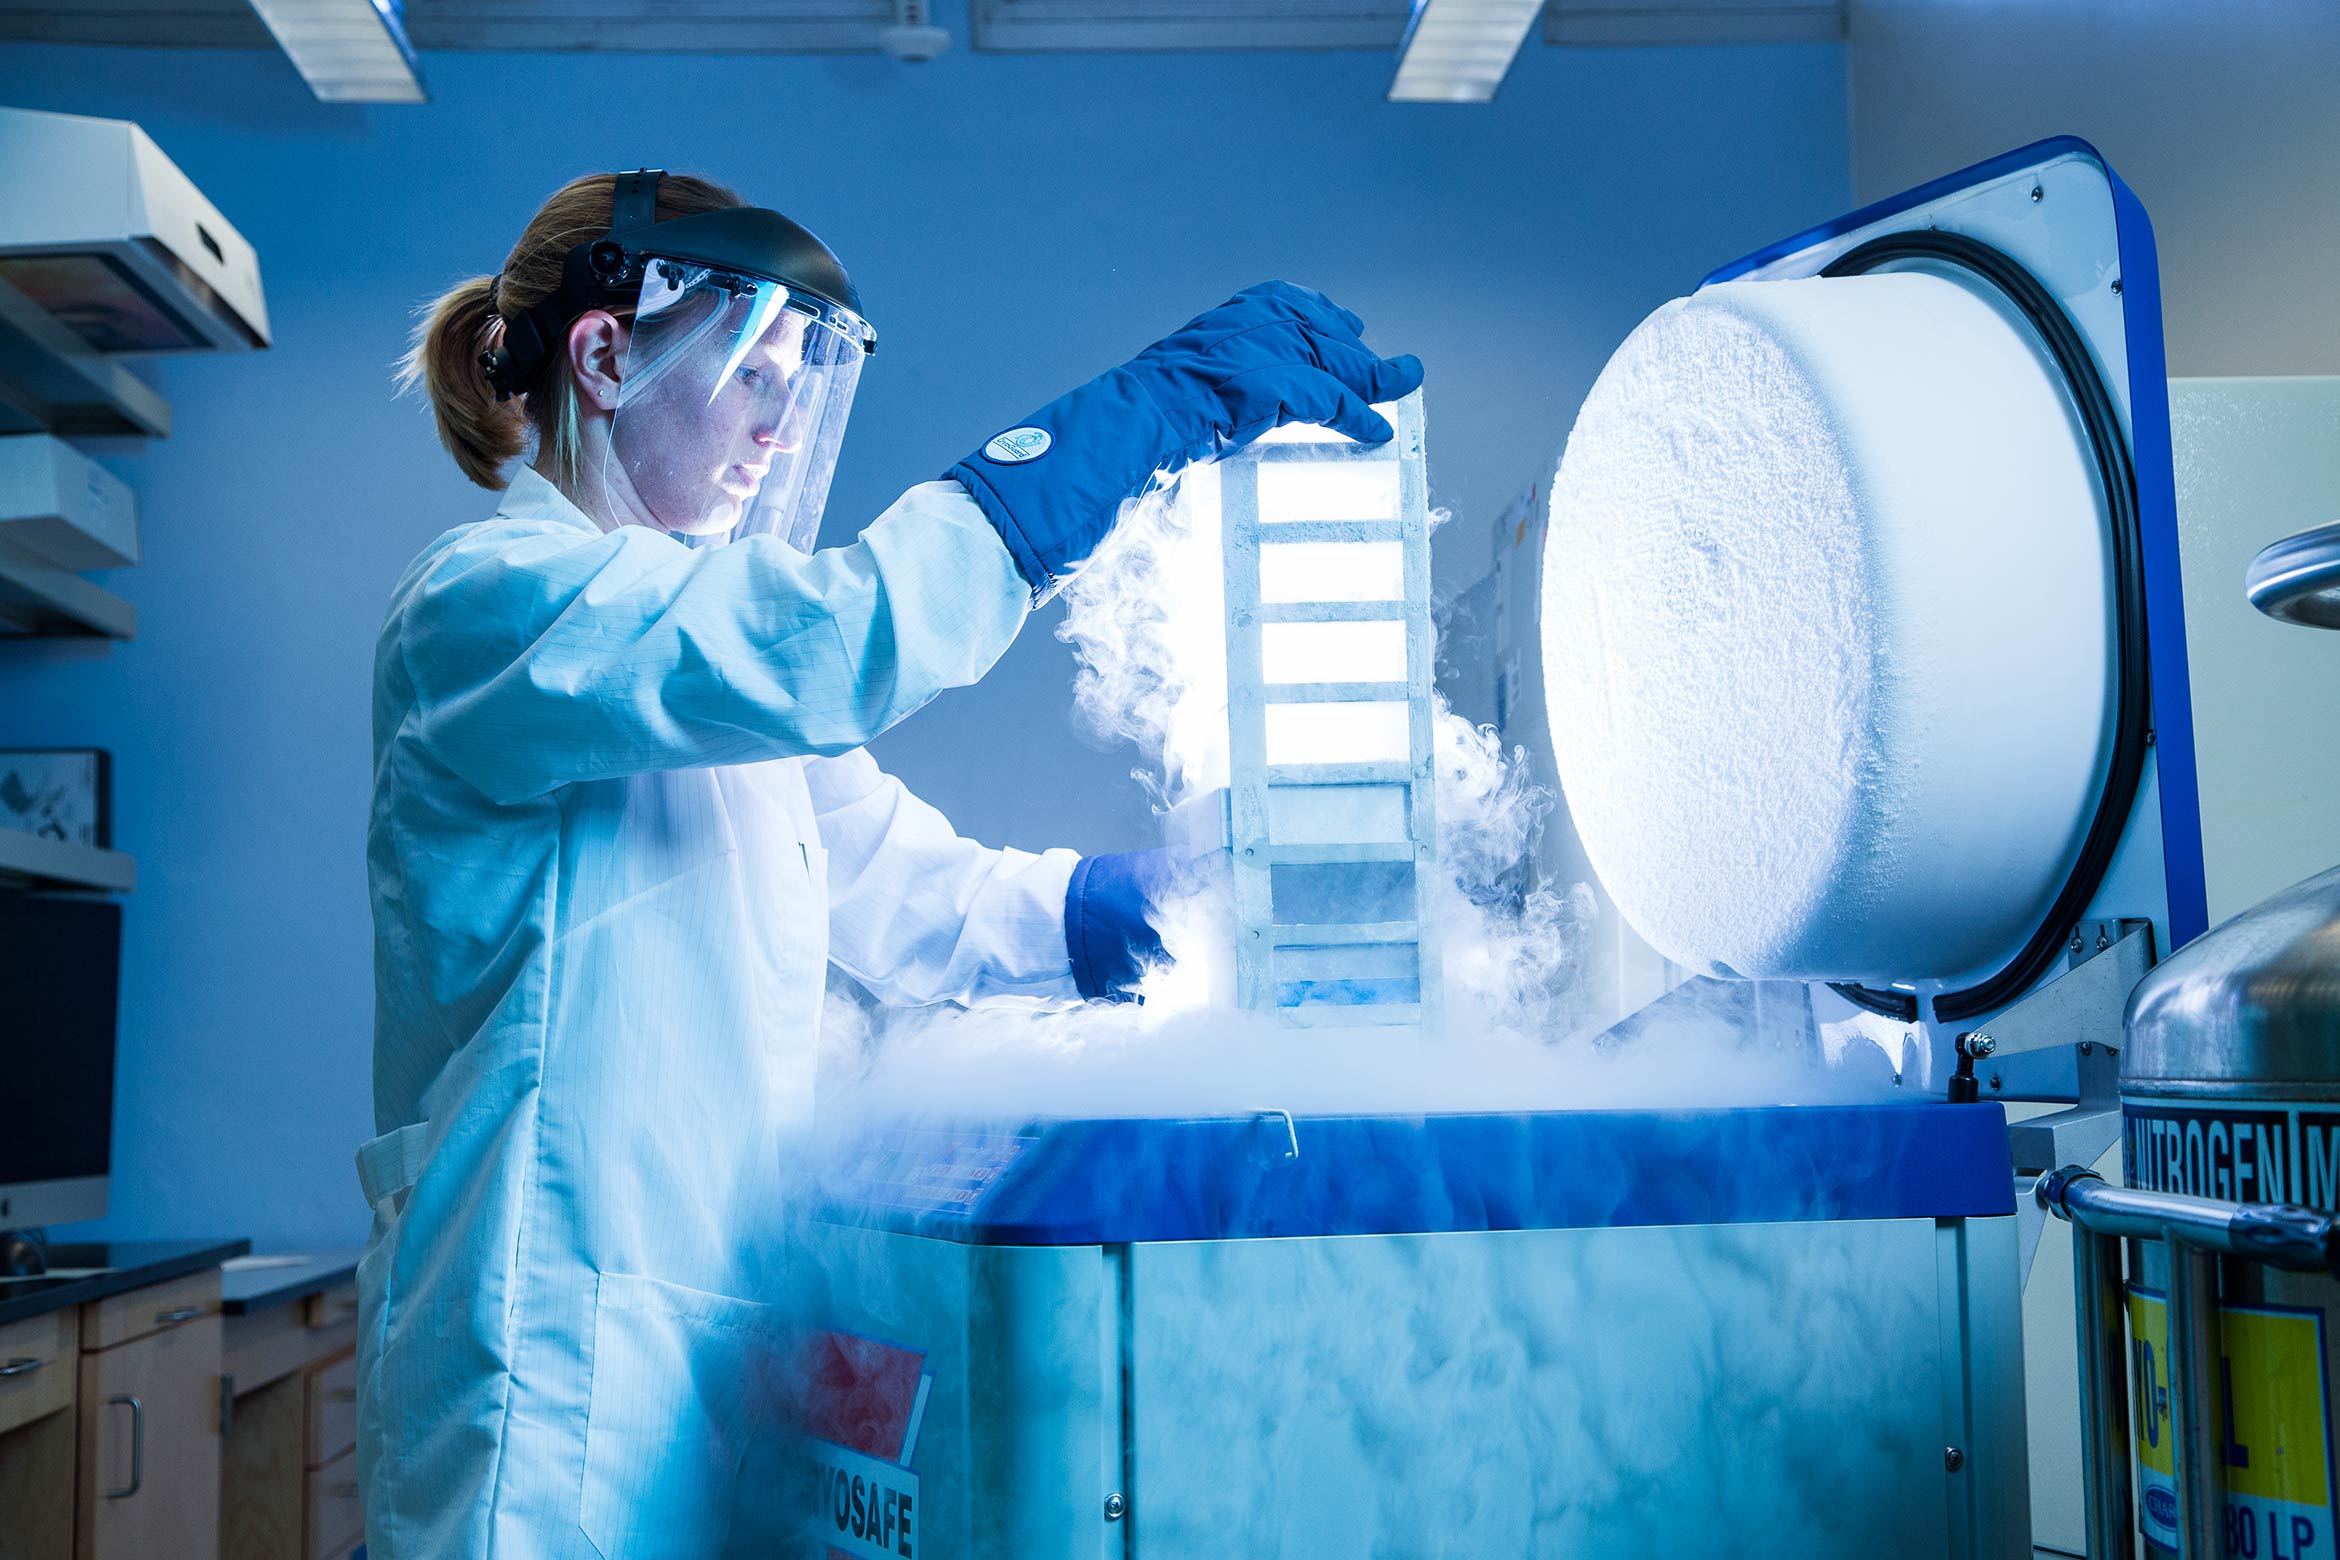 A researcher removing samples from a liquid nitrogen tank overflowing with a white fog of condensed cold air.